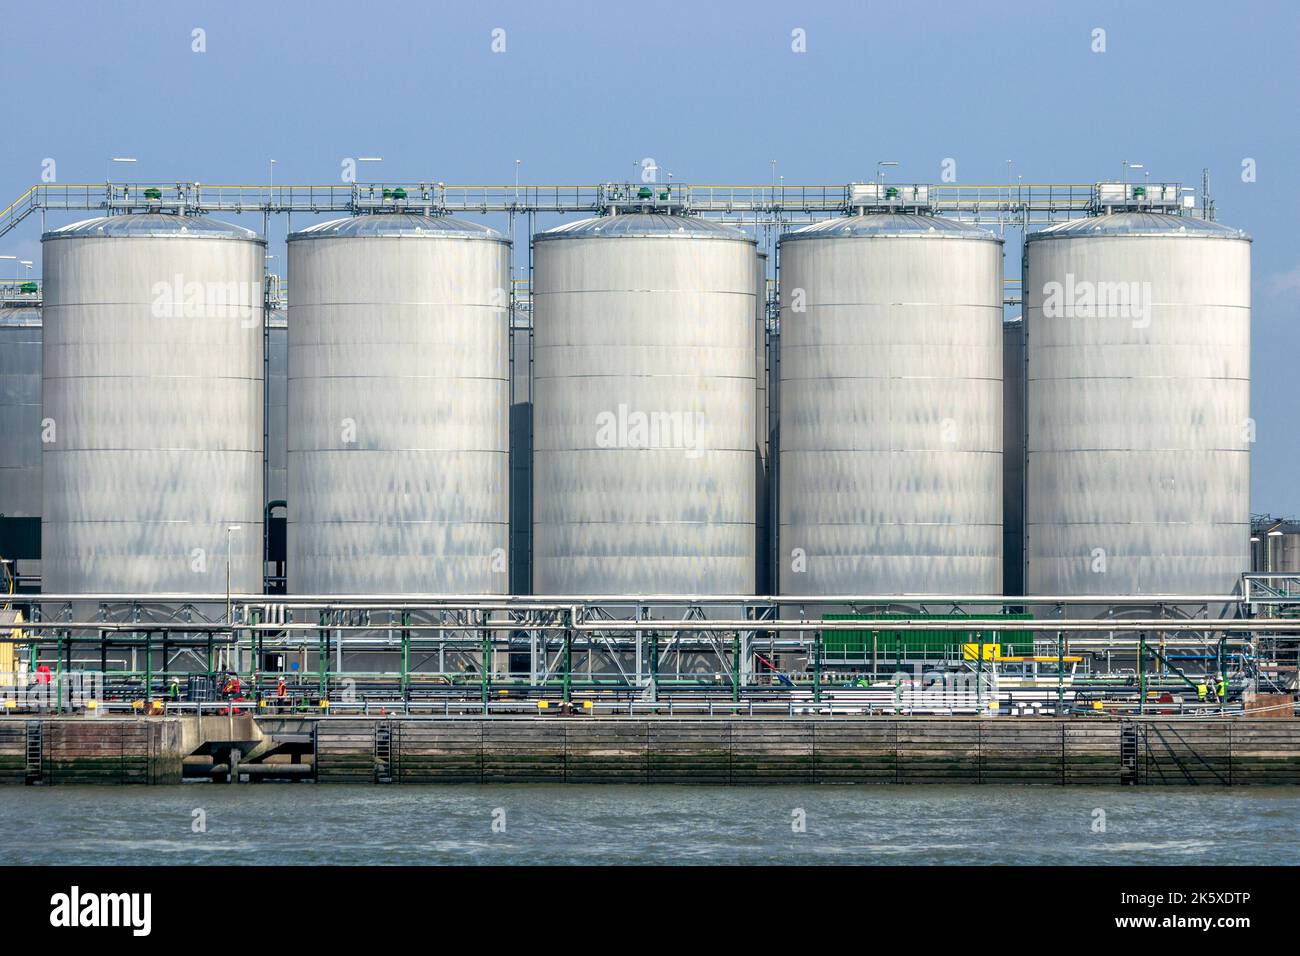 Oil storage tanks at a petrochemical industry Stock Photo